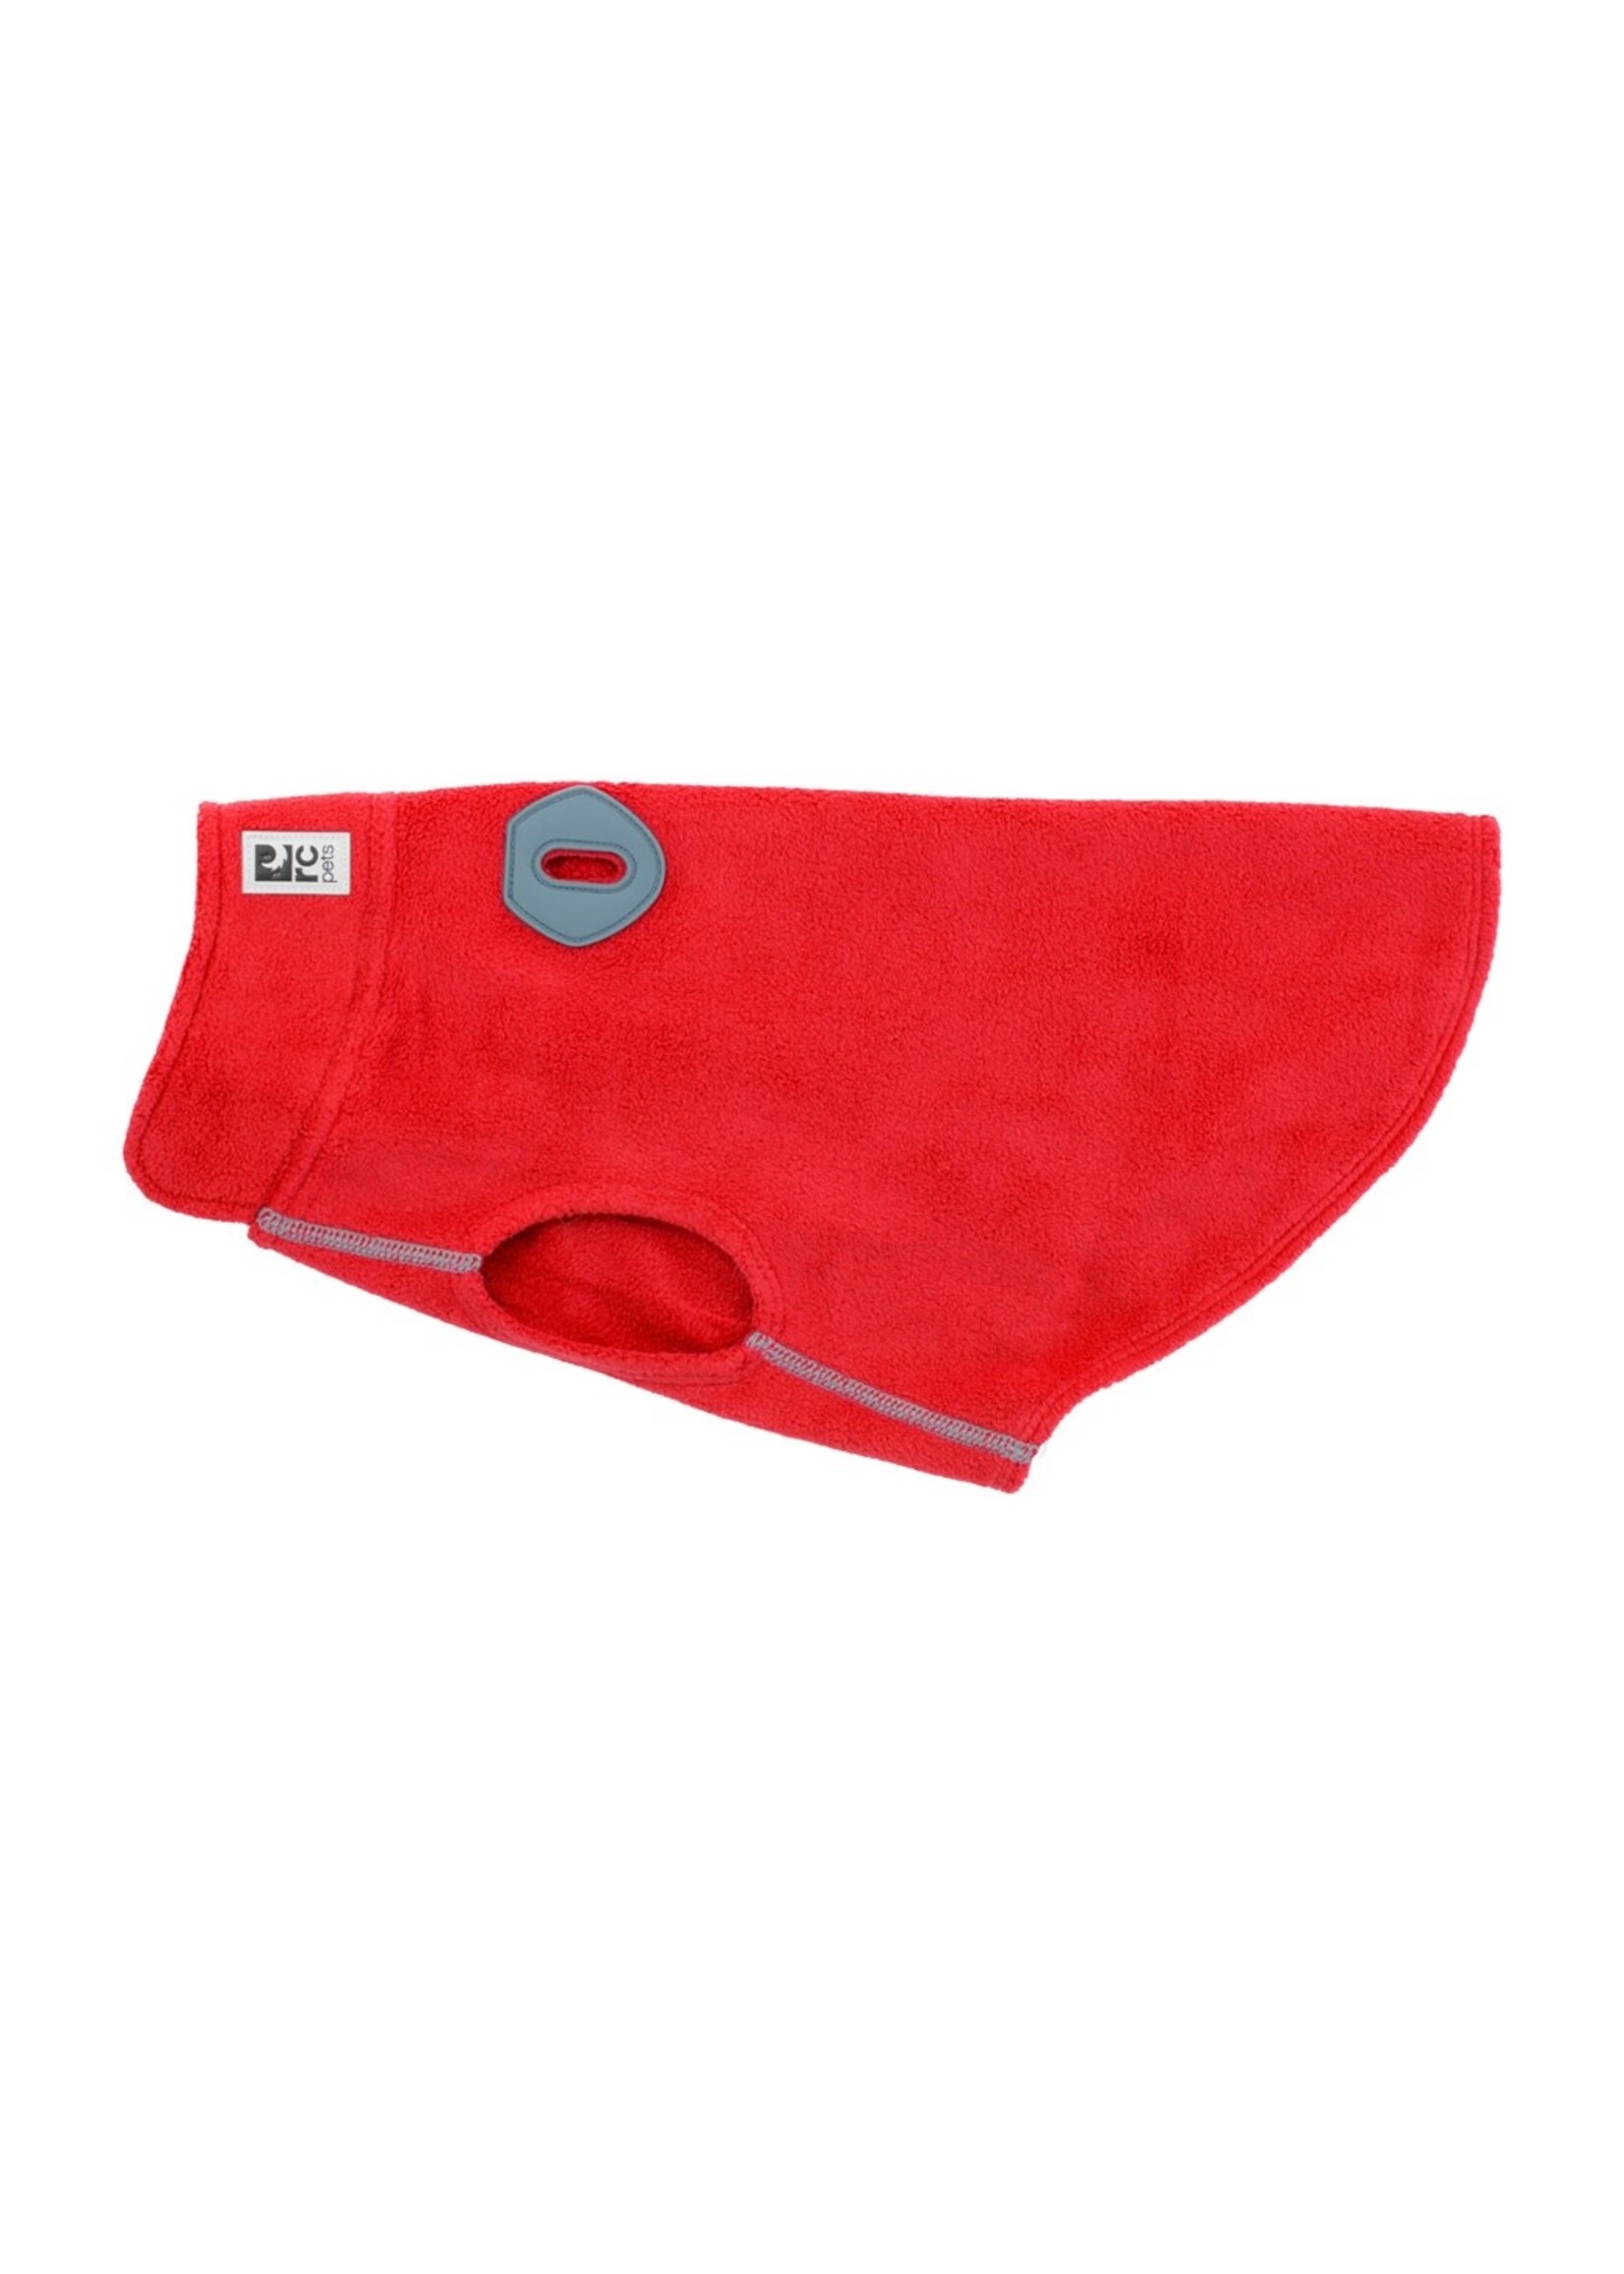 RC Pets Products RC Pets - Baseline Fleece Red/Grey